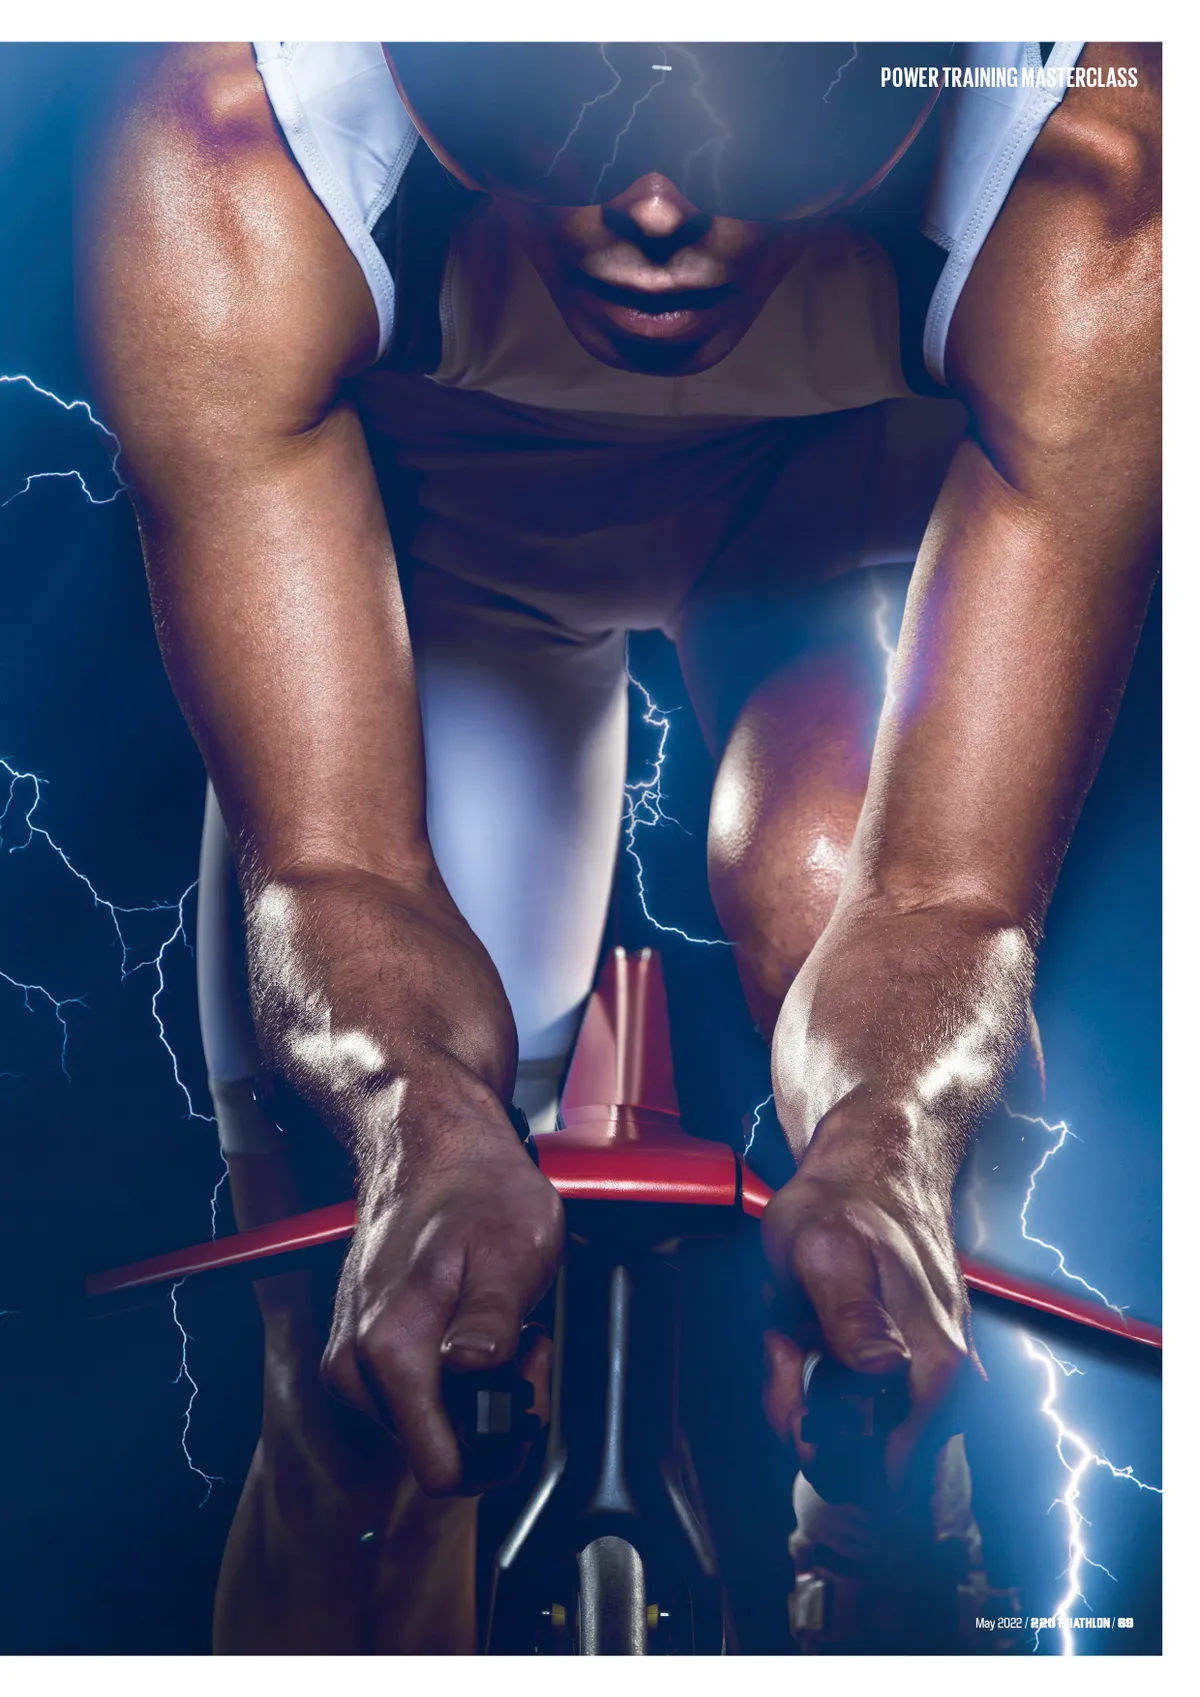 How to use power in training article